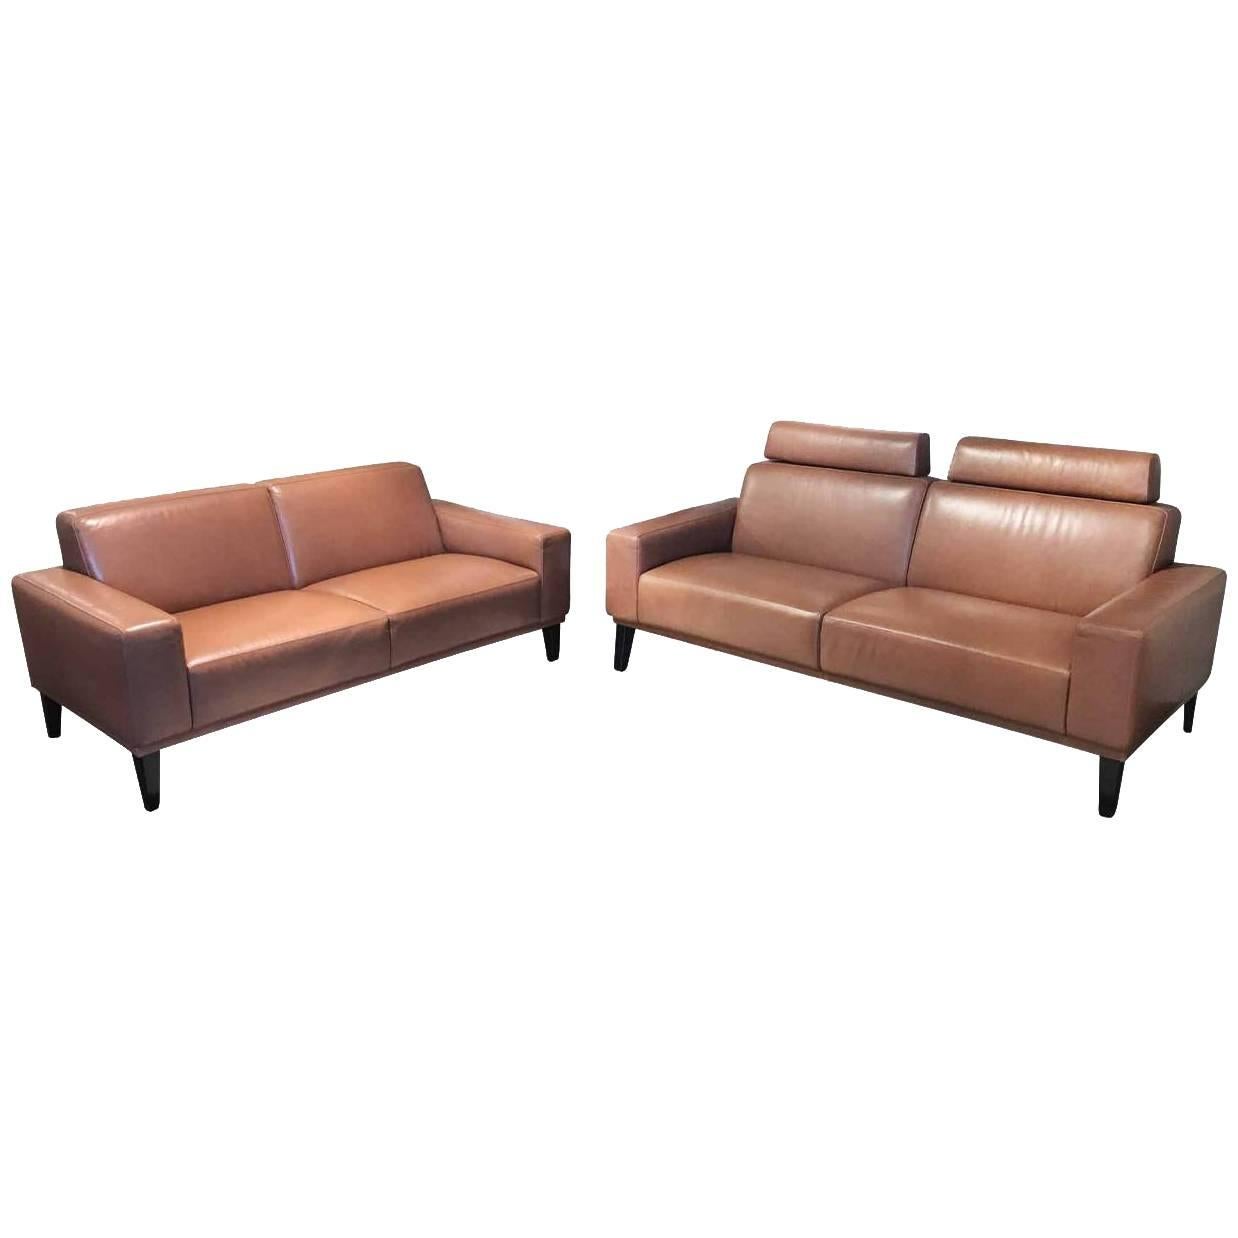 Sofa Set "Marchello-L" by Manufacturer Activineo in 100% Genuine Leather For Sale